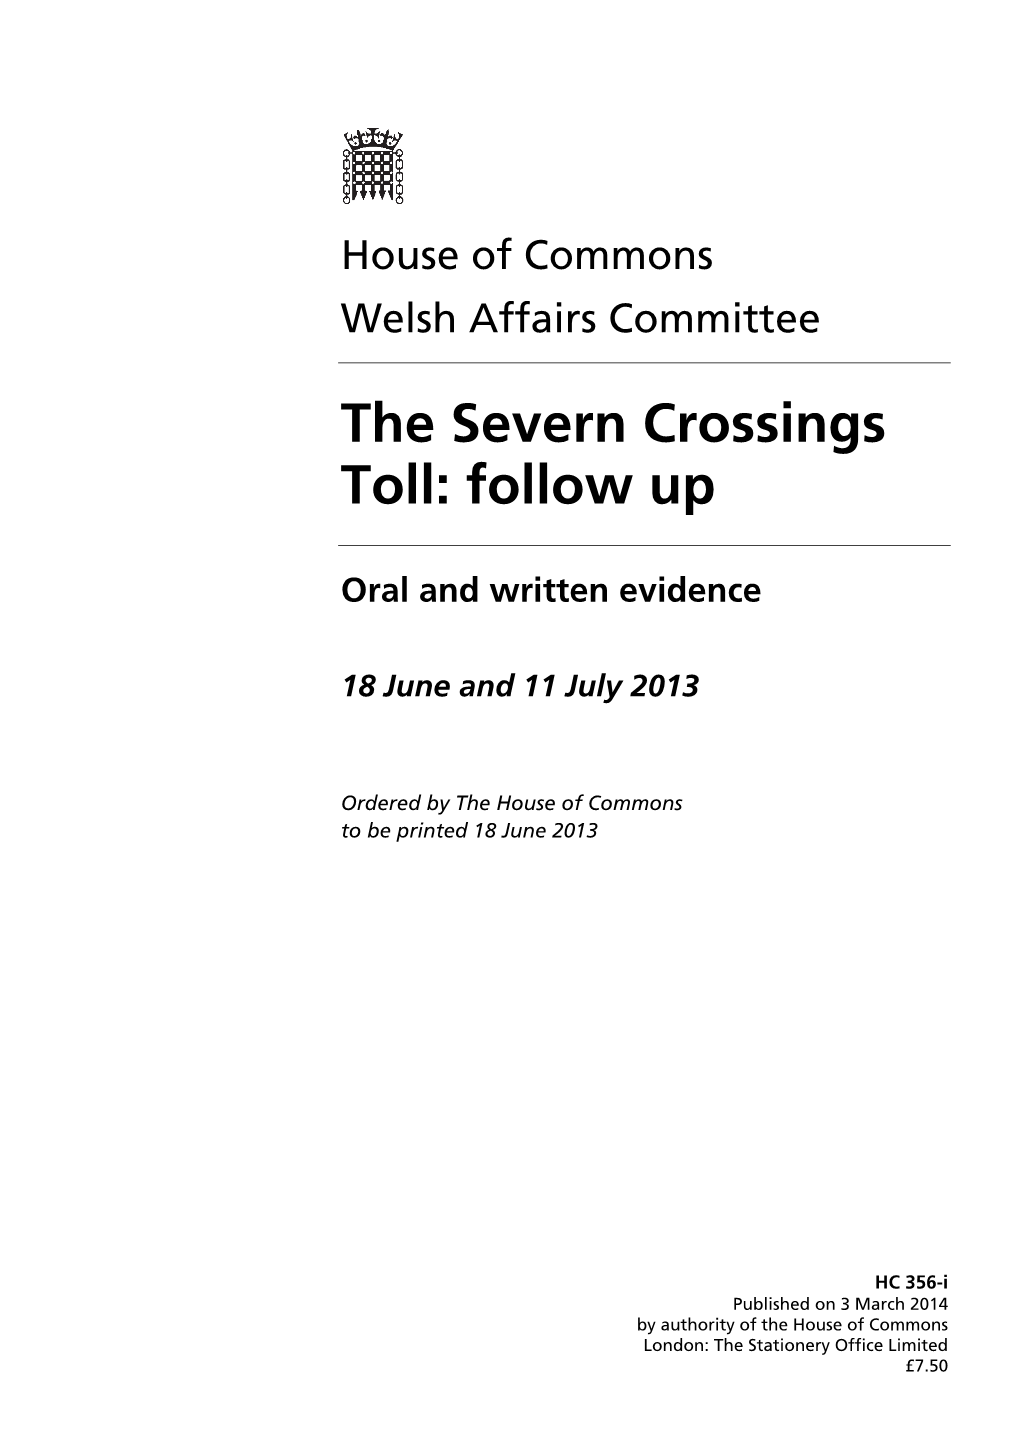 The Severn Crossings Toll: Follow Up